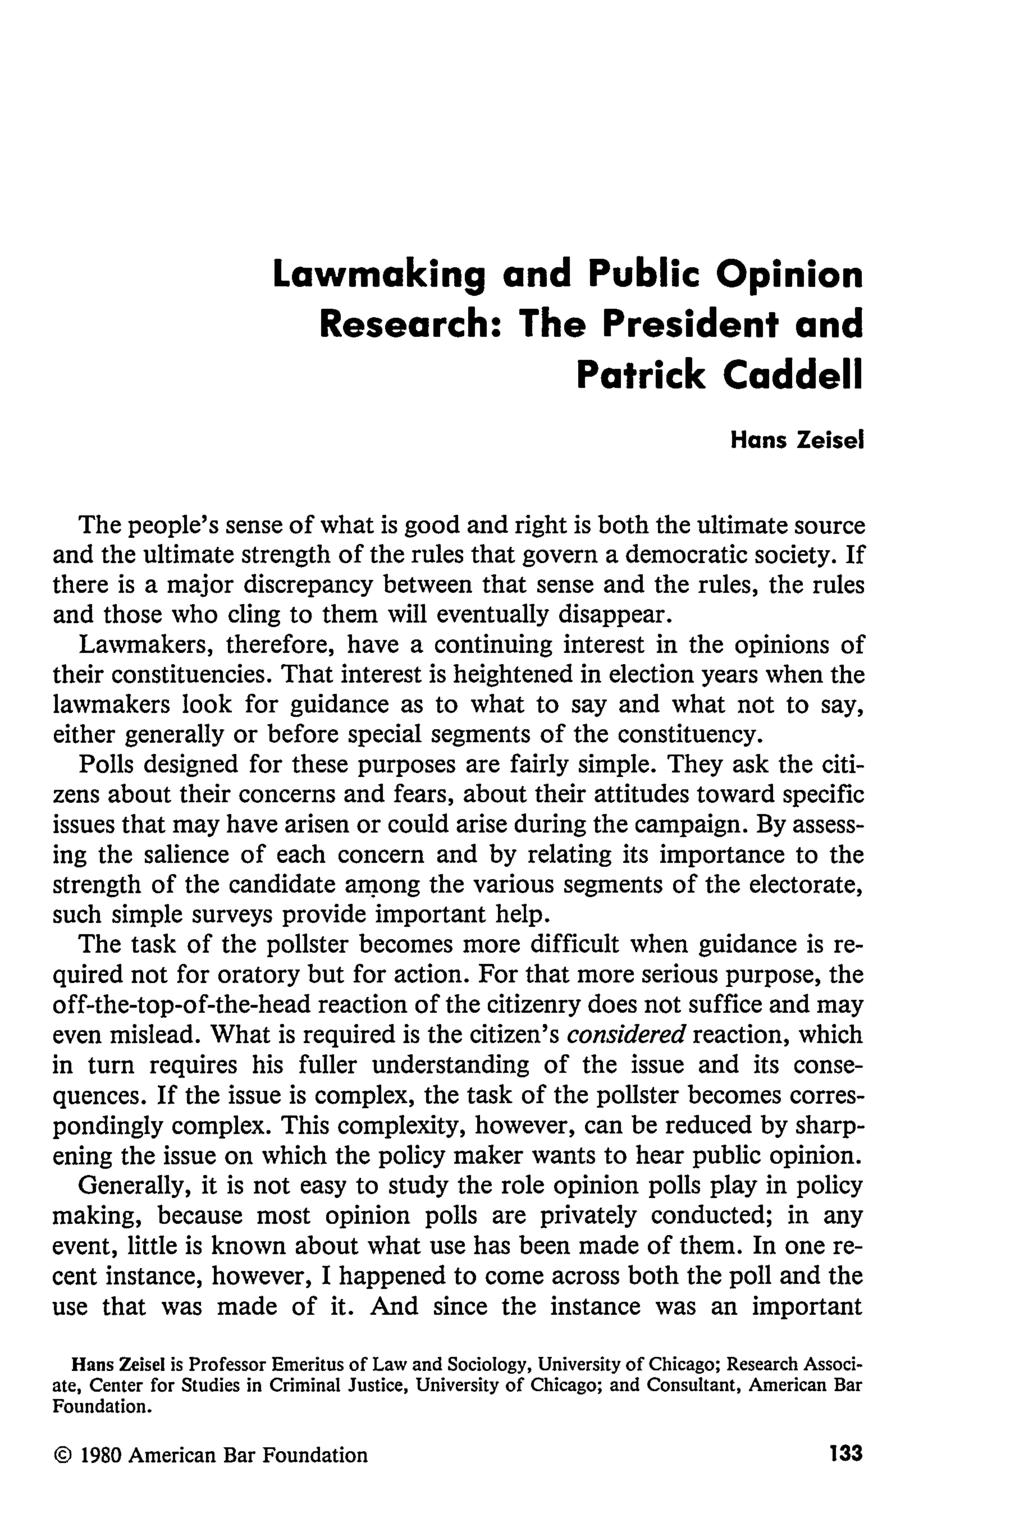 Lawmaking and Public Opinion Research: The President and Patrick Caddell Hans Zeisel The people's sense of what is good and right is both the ultimate source and the ultimate strength of the rules